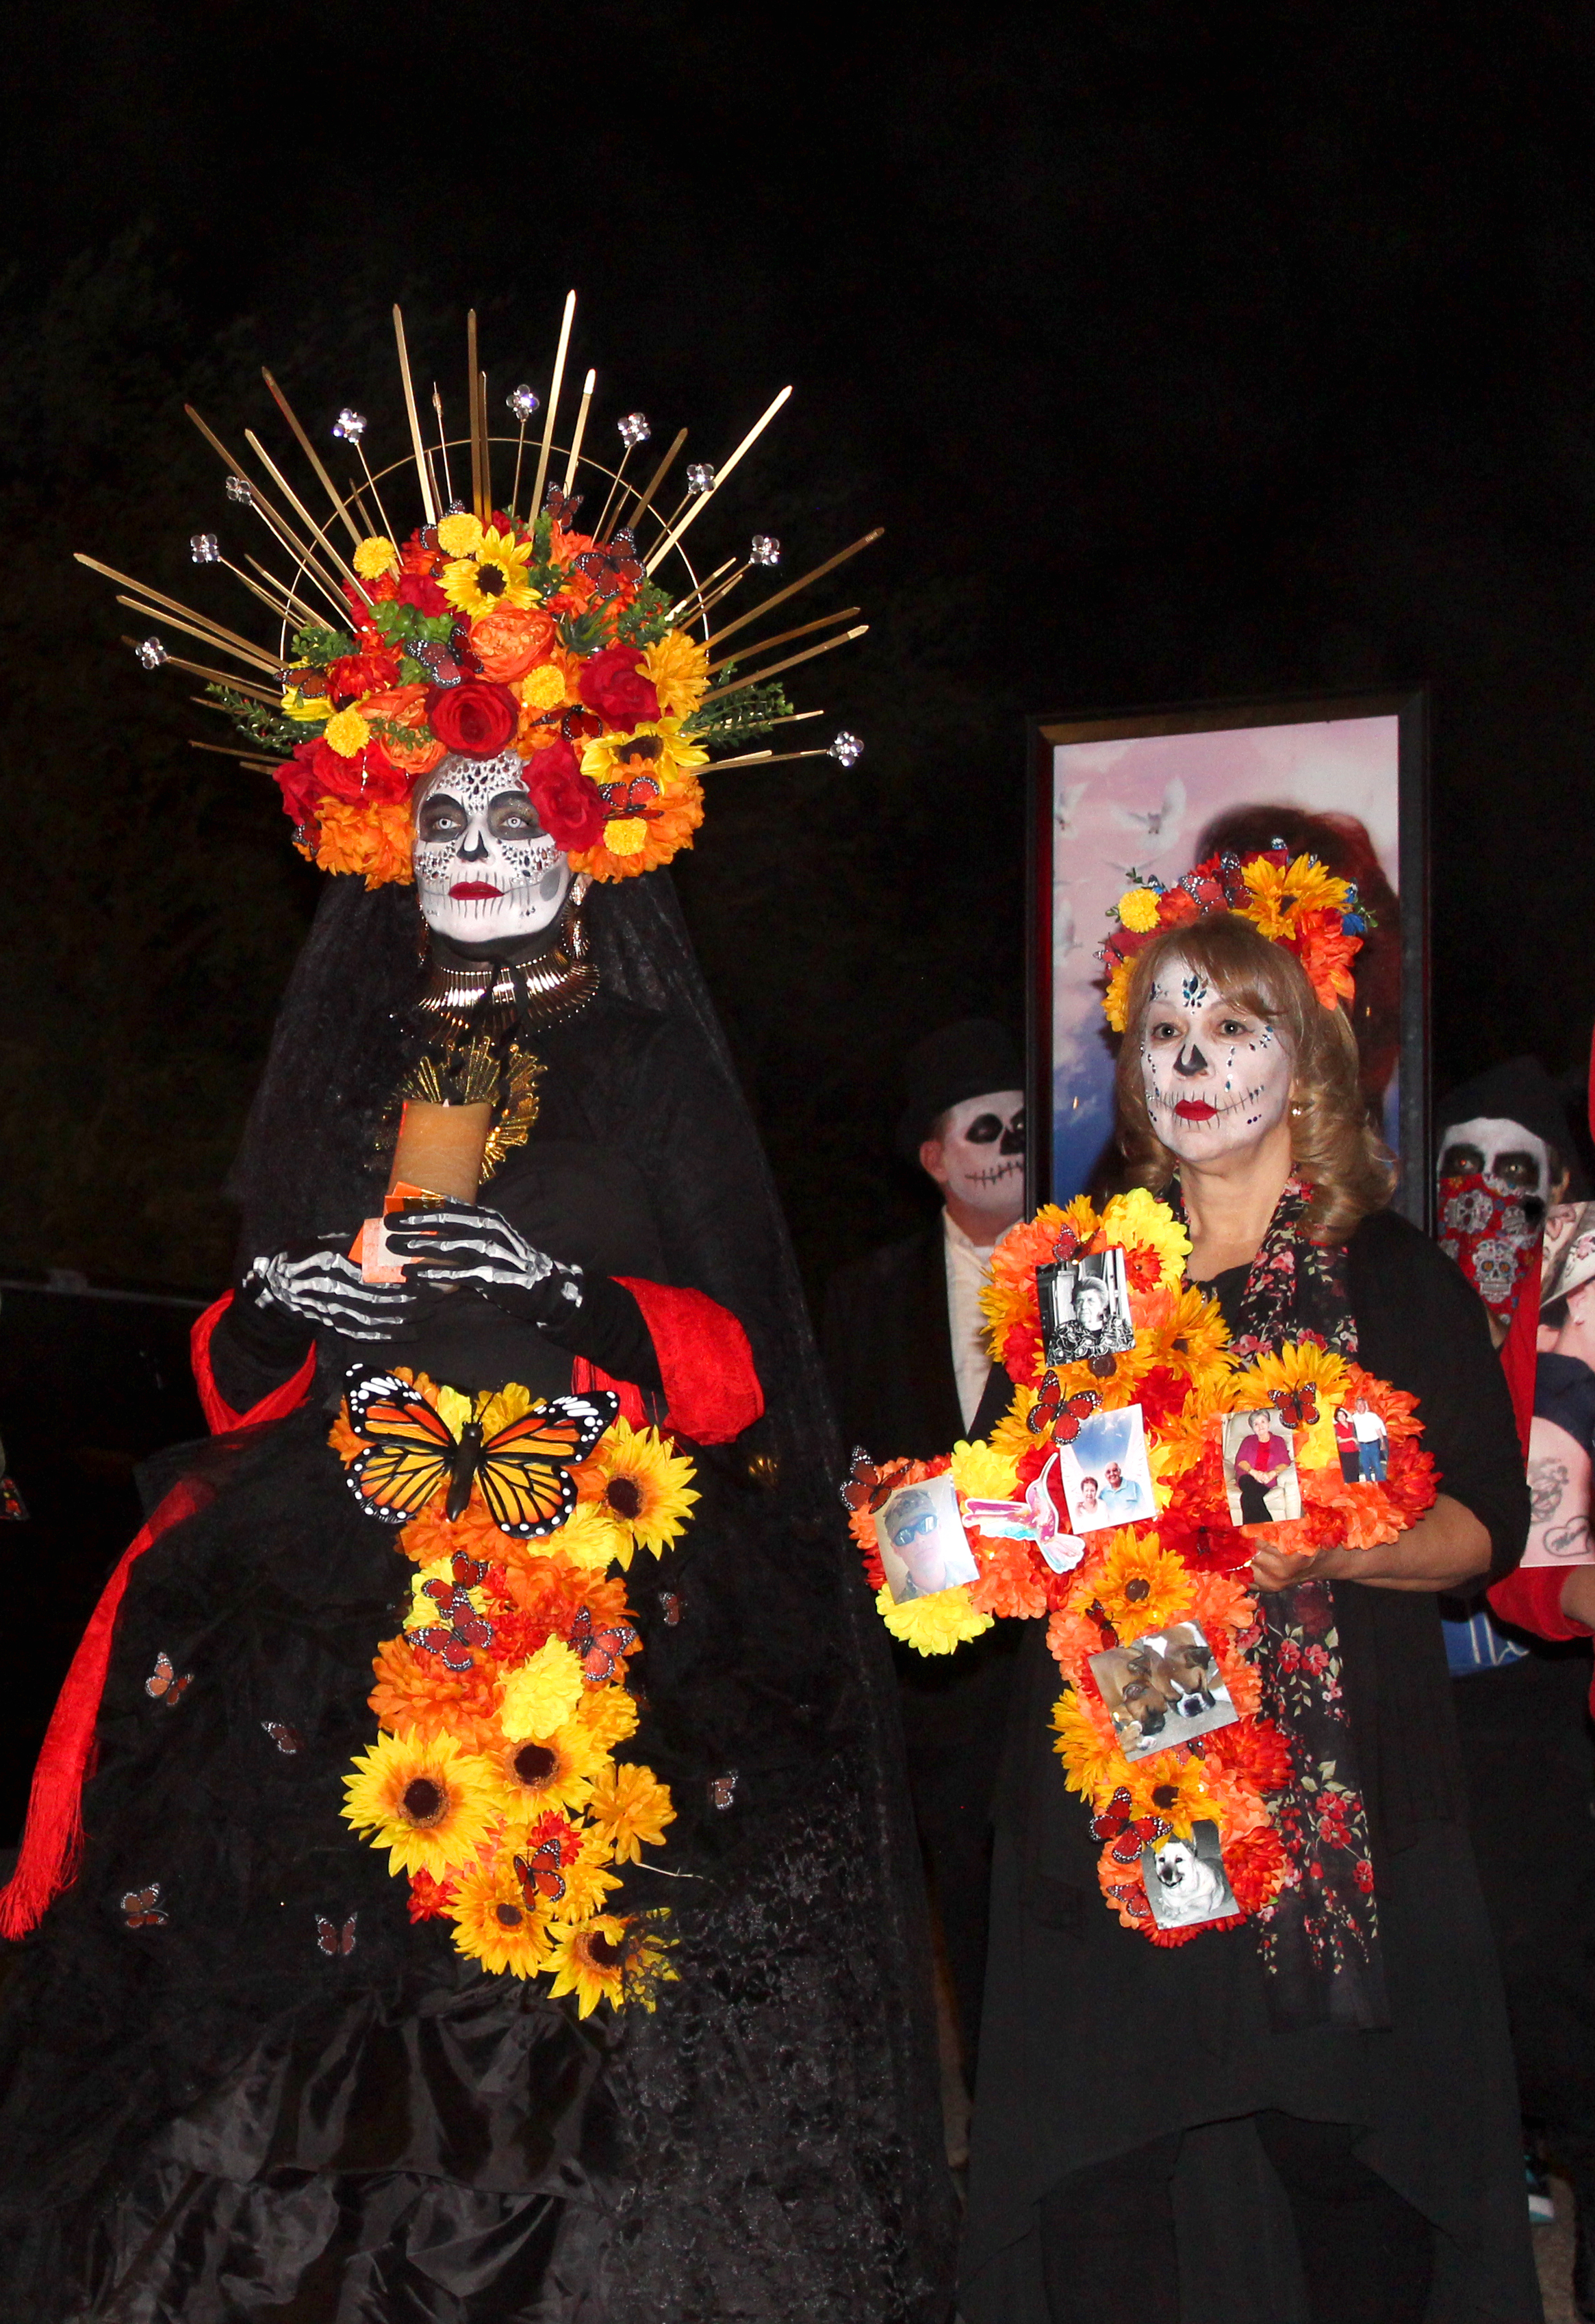 Attendees dressed up as calaveras as they walk the streets to remember loved ones.